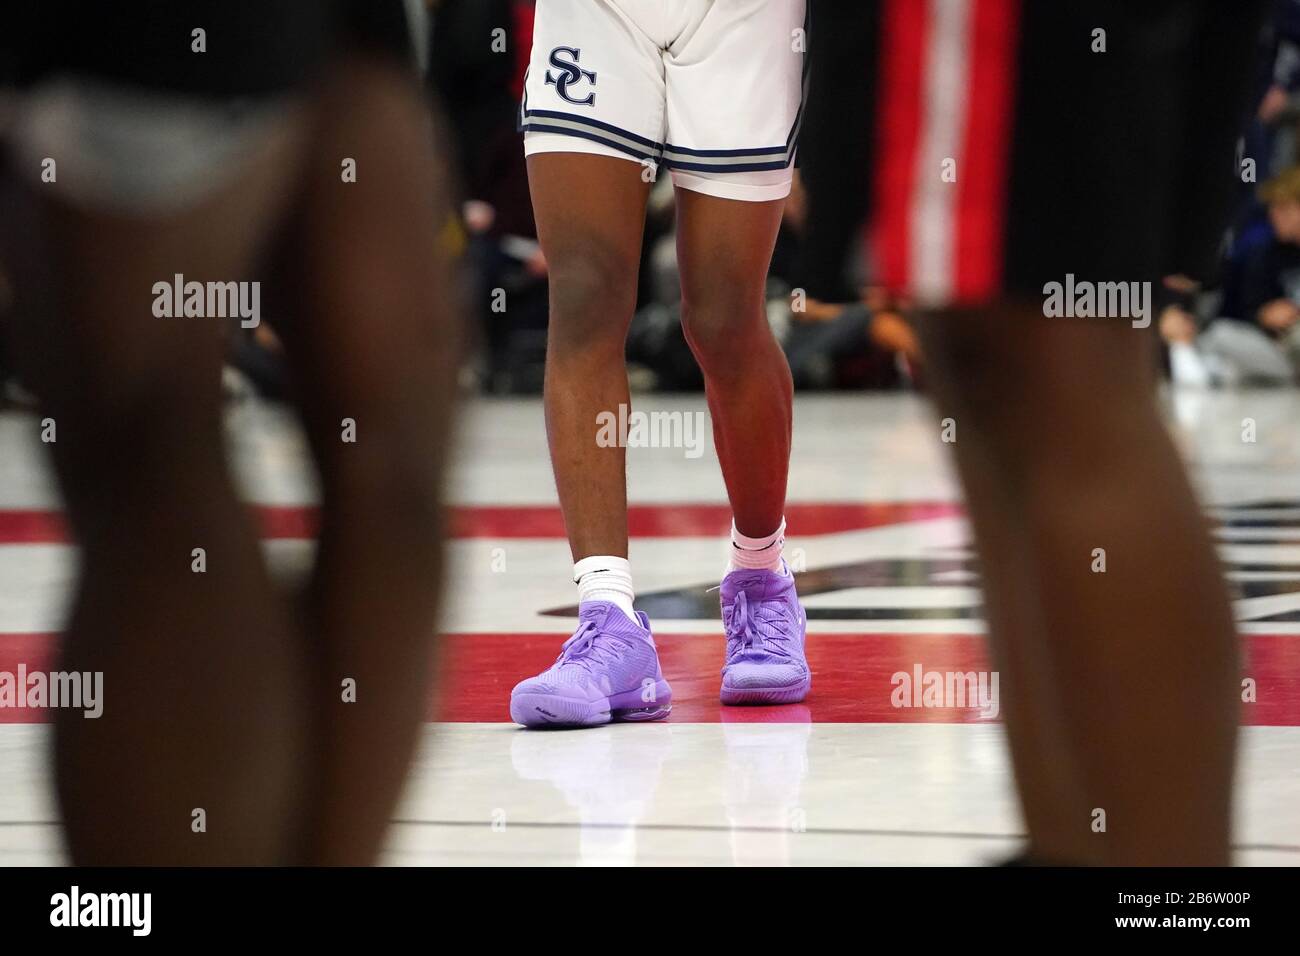 what size shoe does bronny wear